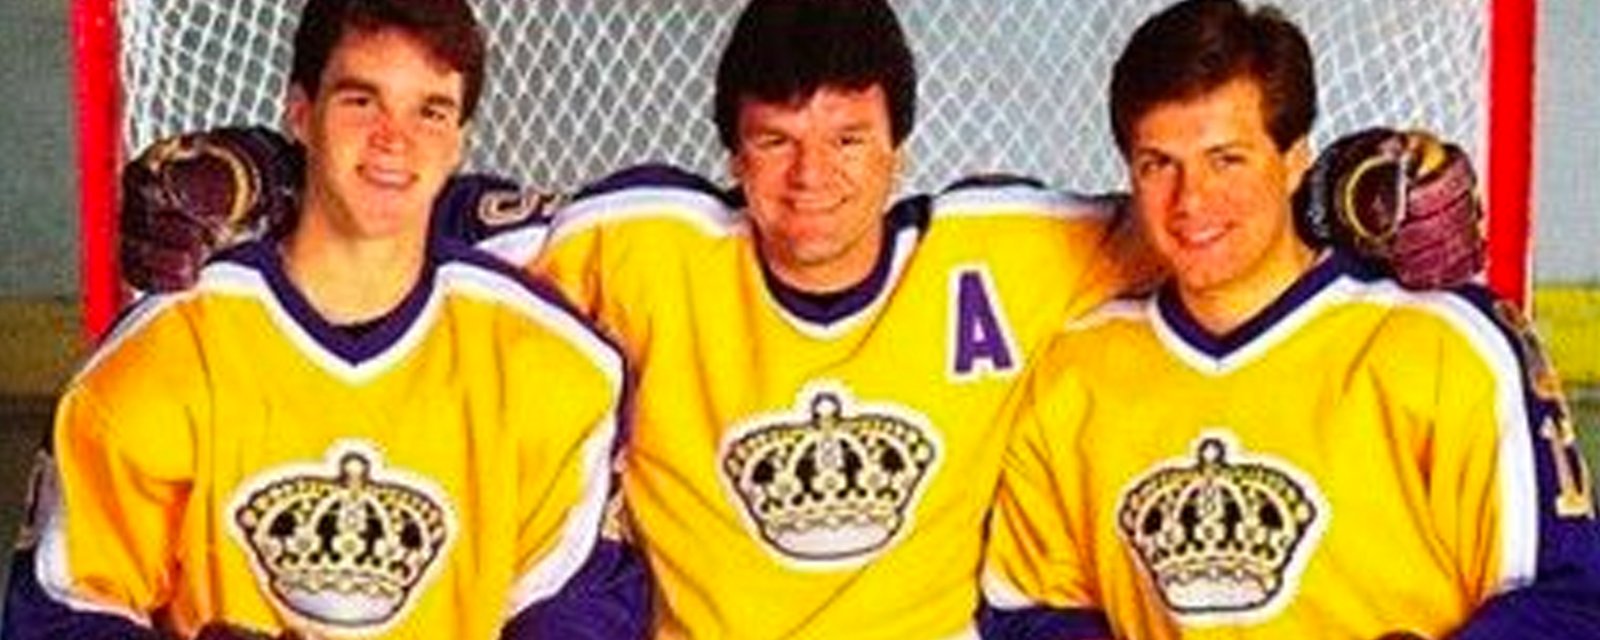 Leaked: Kings bringing back purple and gold jerseys!?